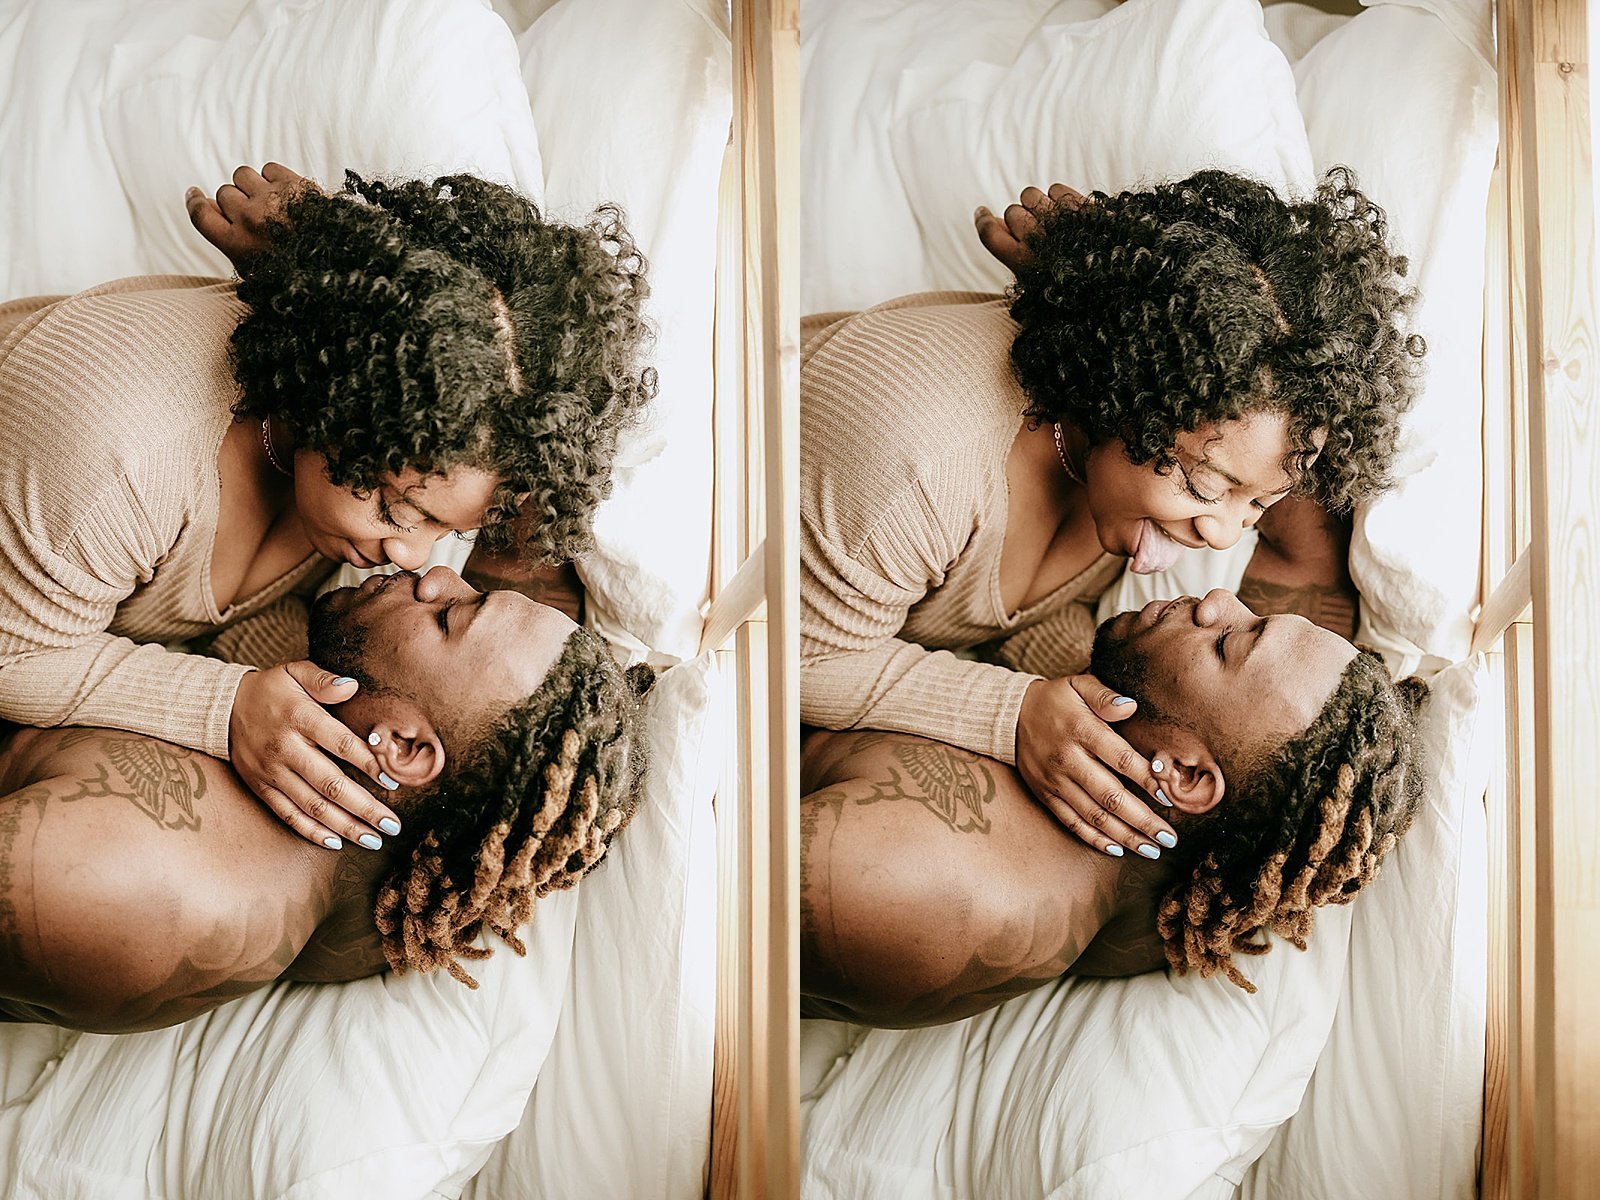  Man and woman kissing on a bed for in-home photo shoot by Minneapolis photographer, McKenzie Berquam 